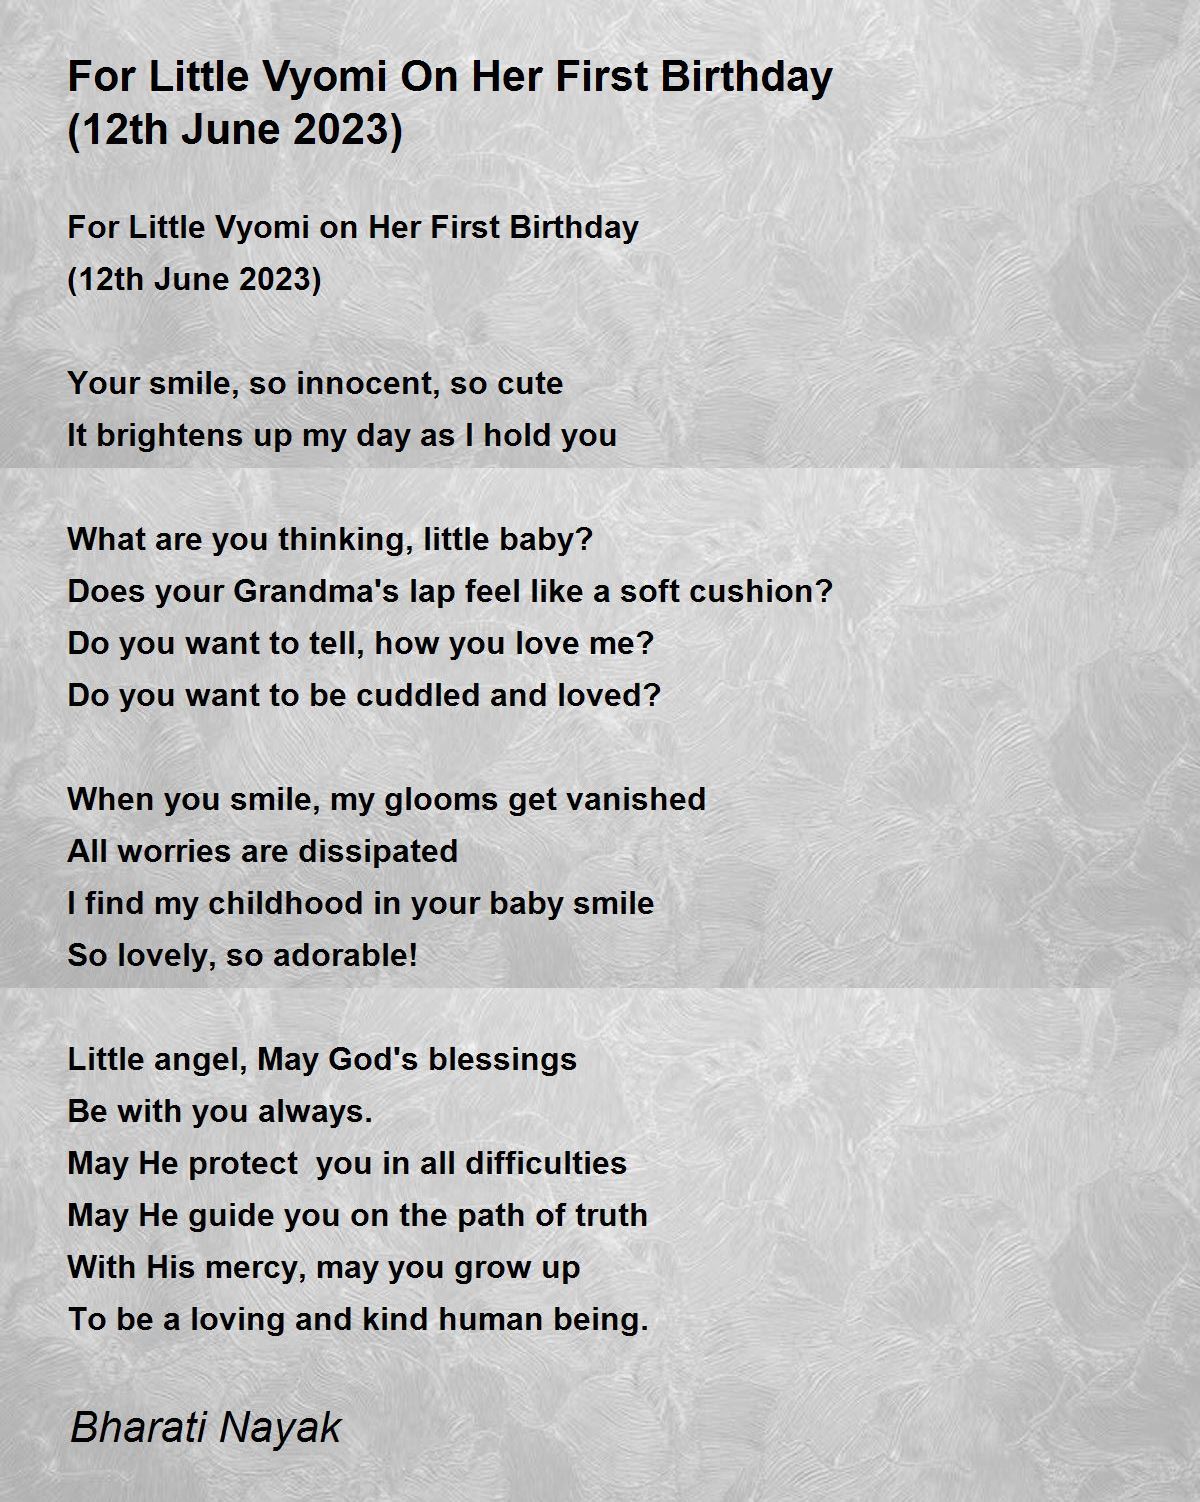 For Little Vyomi On Her First Birthday (12th June 2023) - For Little Vyomi On Her First Birthday (12th June 2023) Poem by Bharati Nayak